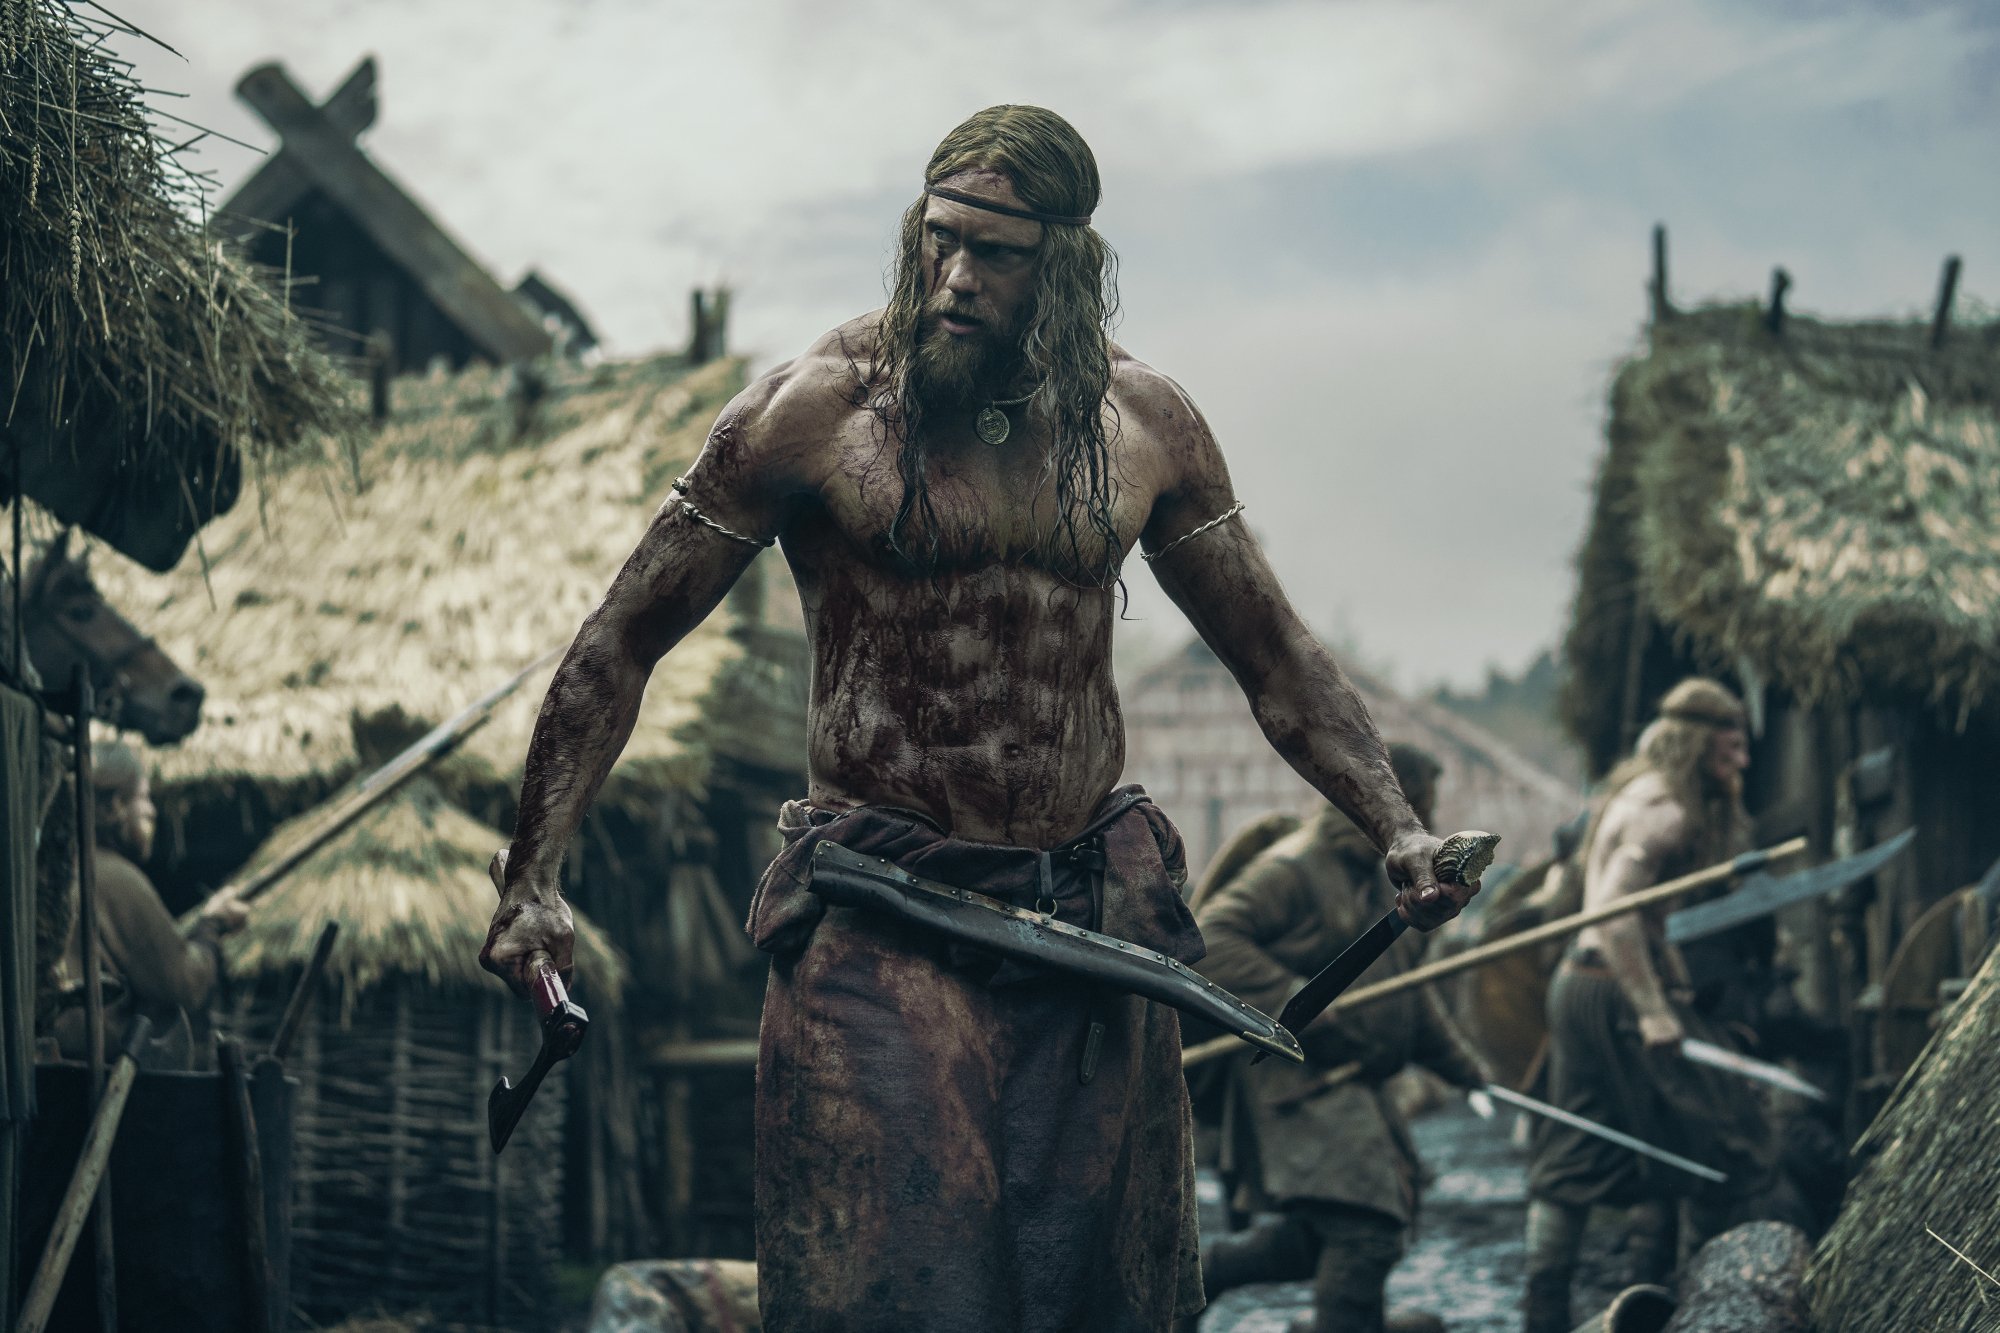 'The Northman' Alexander Skarsgård as Amleth shirtless covered in blood holding a weapon in each hand